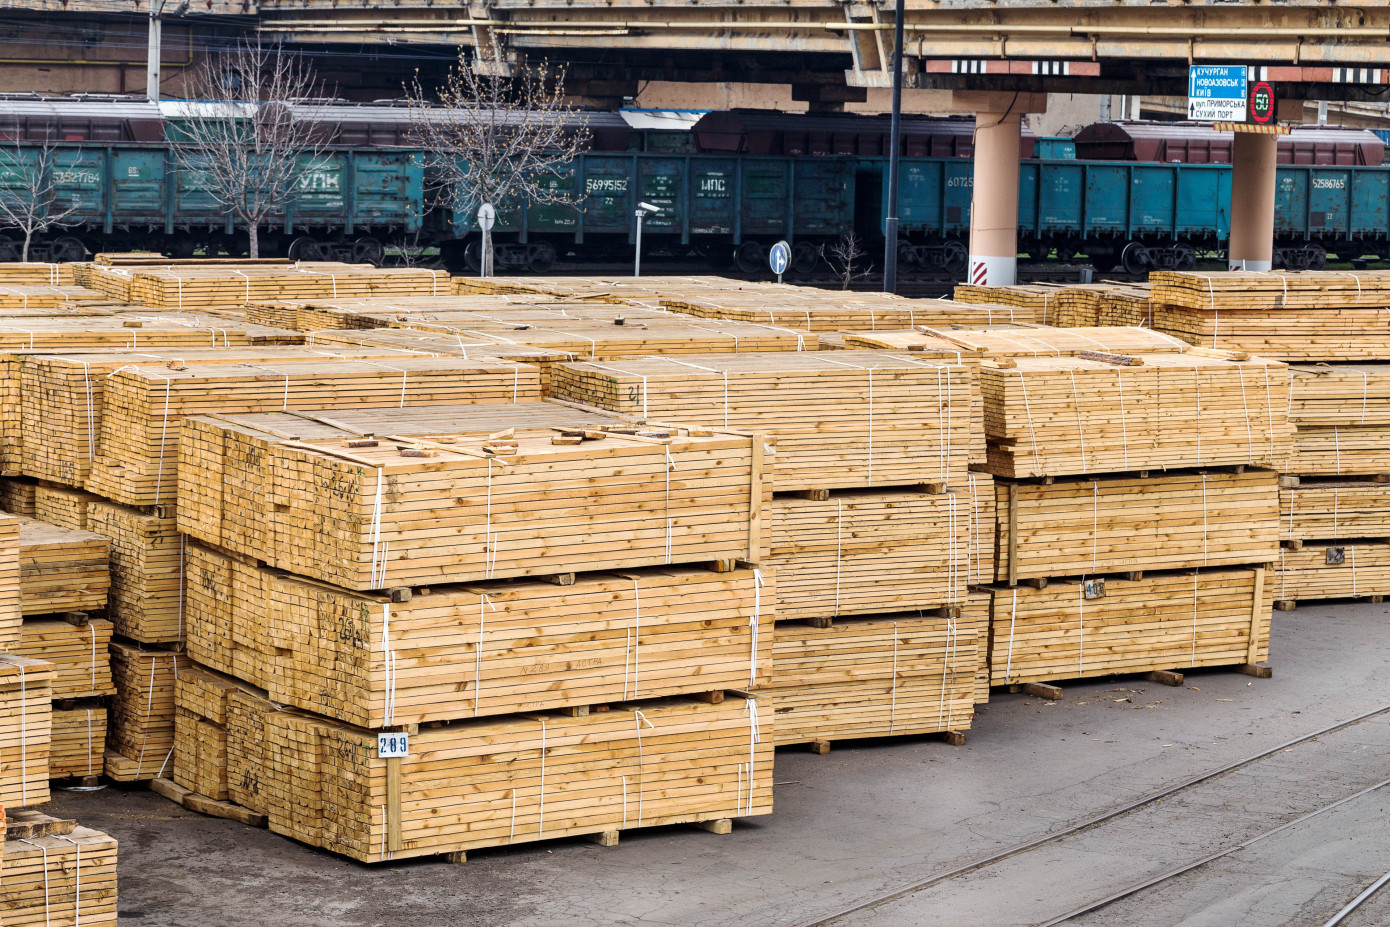 In March, price for softwood lumber imported to U.S. up 3%